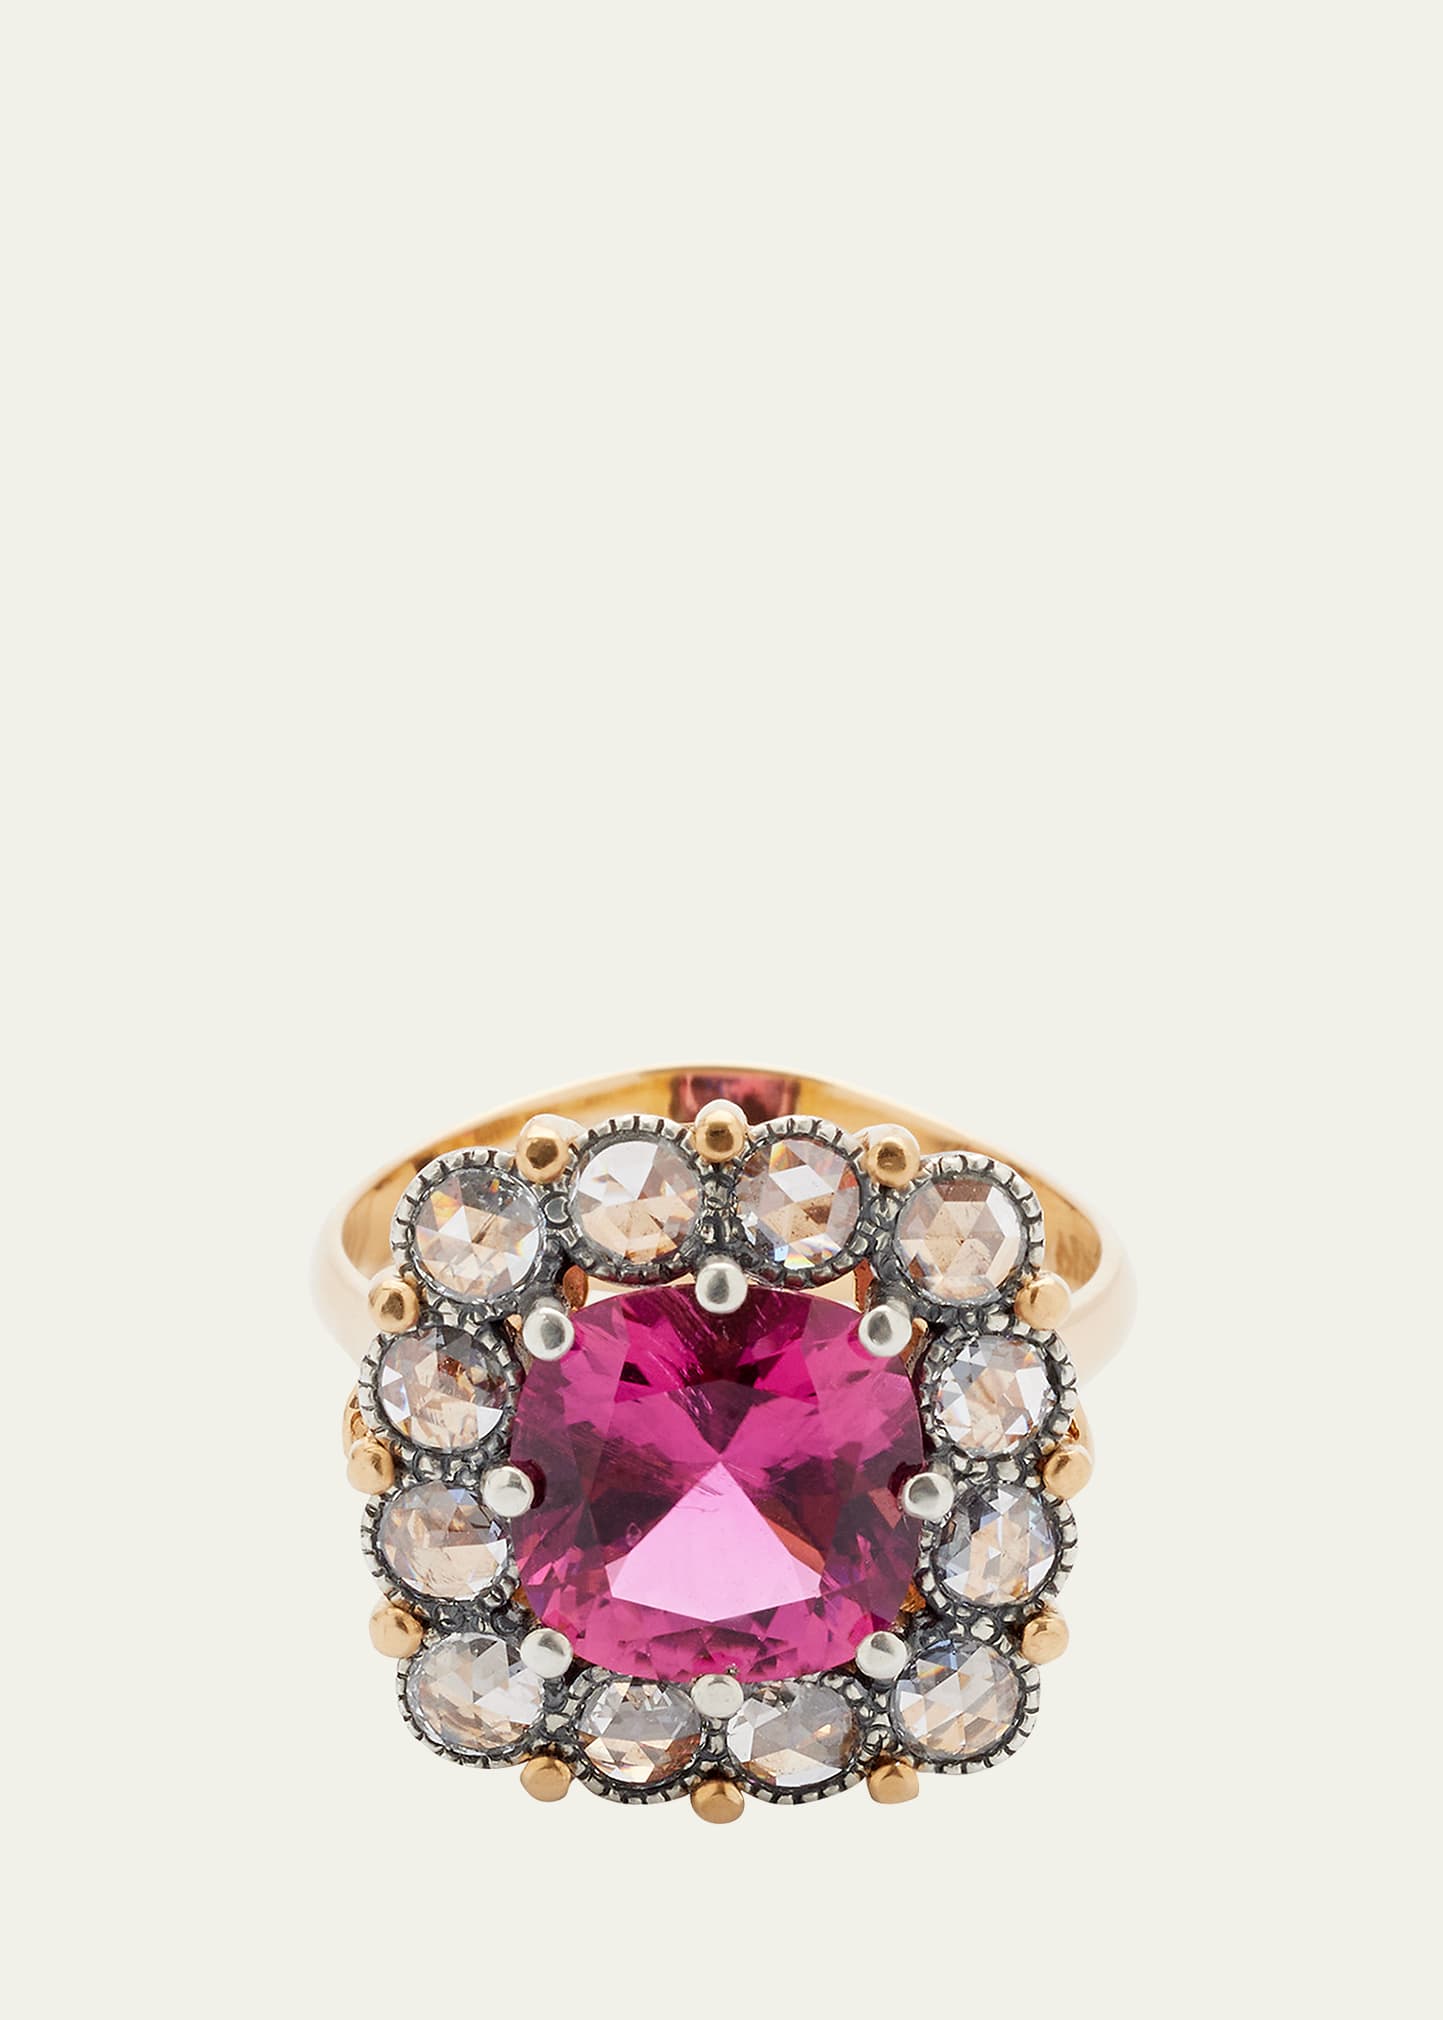 Arman Sarkisyan Rubellite Ring with Diamonds in 22k Gold and Silver